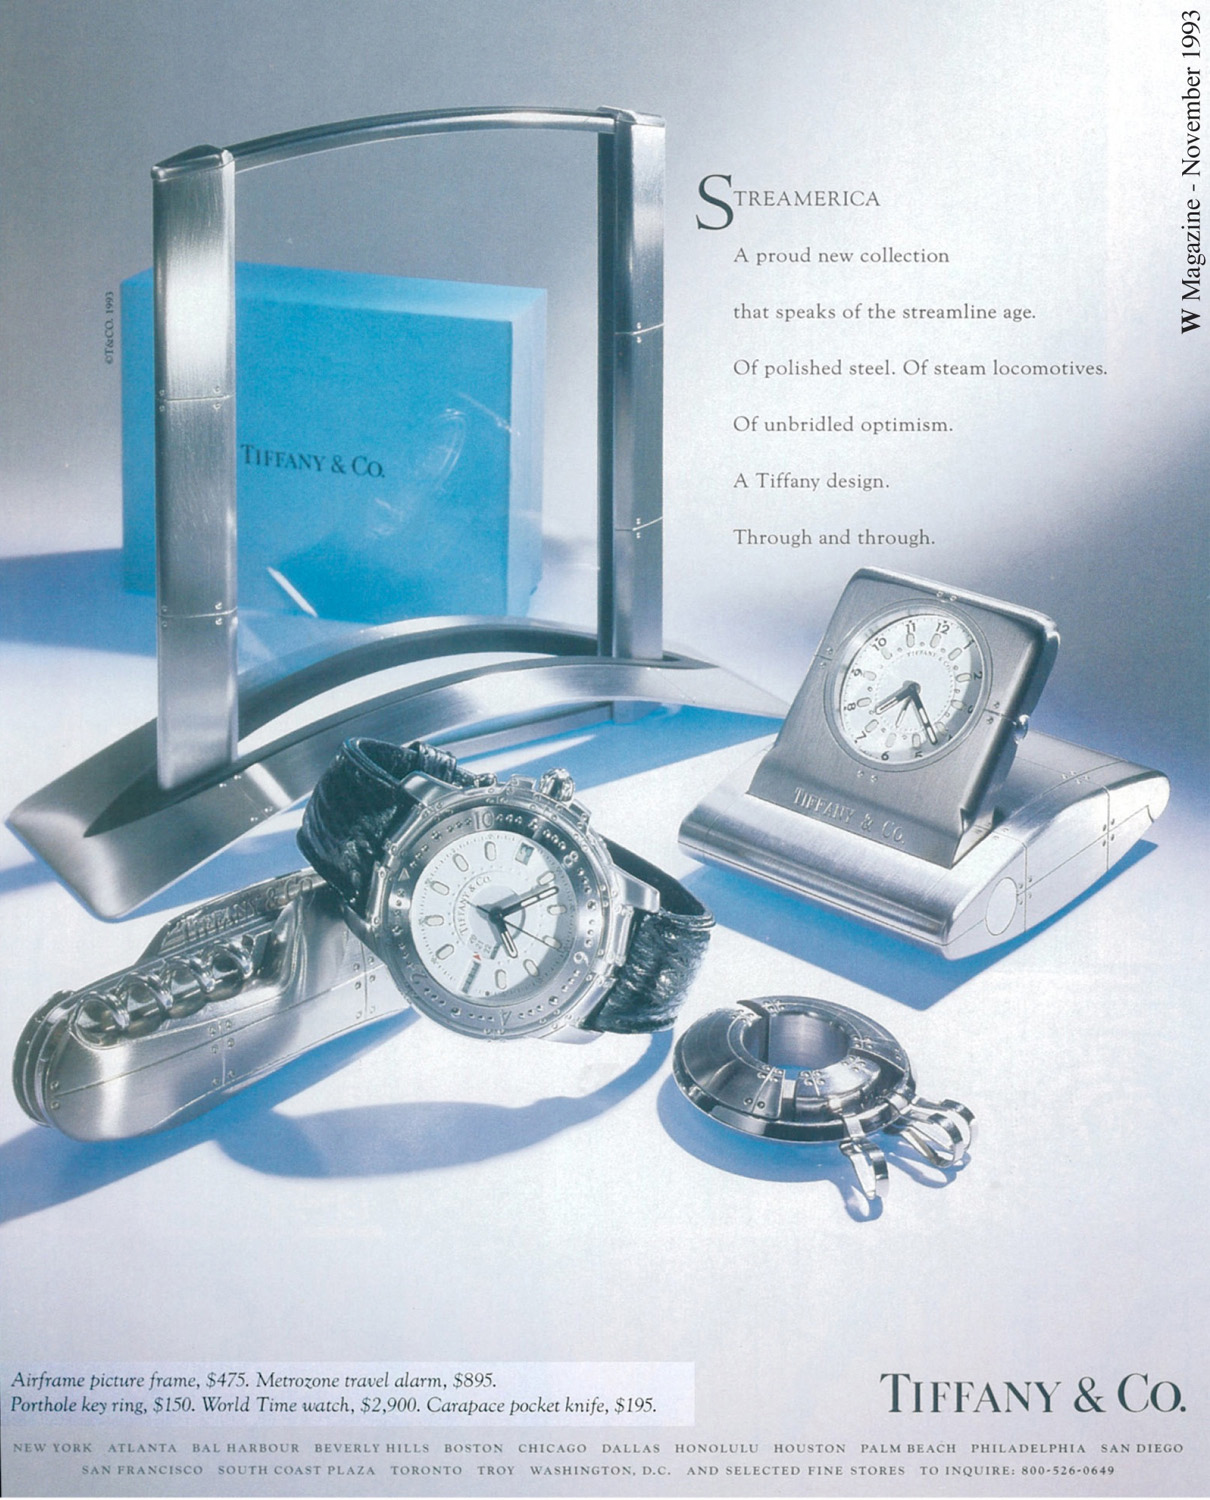 W Magazine Advertisement 1993 debut Streamerica Collection by Tiffany & Co. Airframe Large Picture Frame, Carapace Pocket Knife, World time Watch, Metrozone Travel Alarm, and Porthole Key Ring